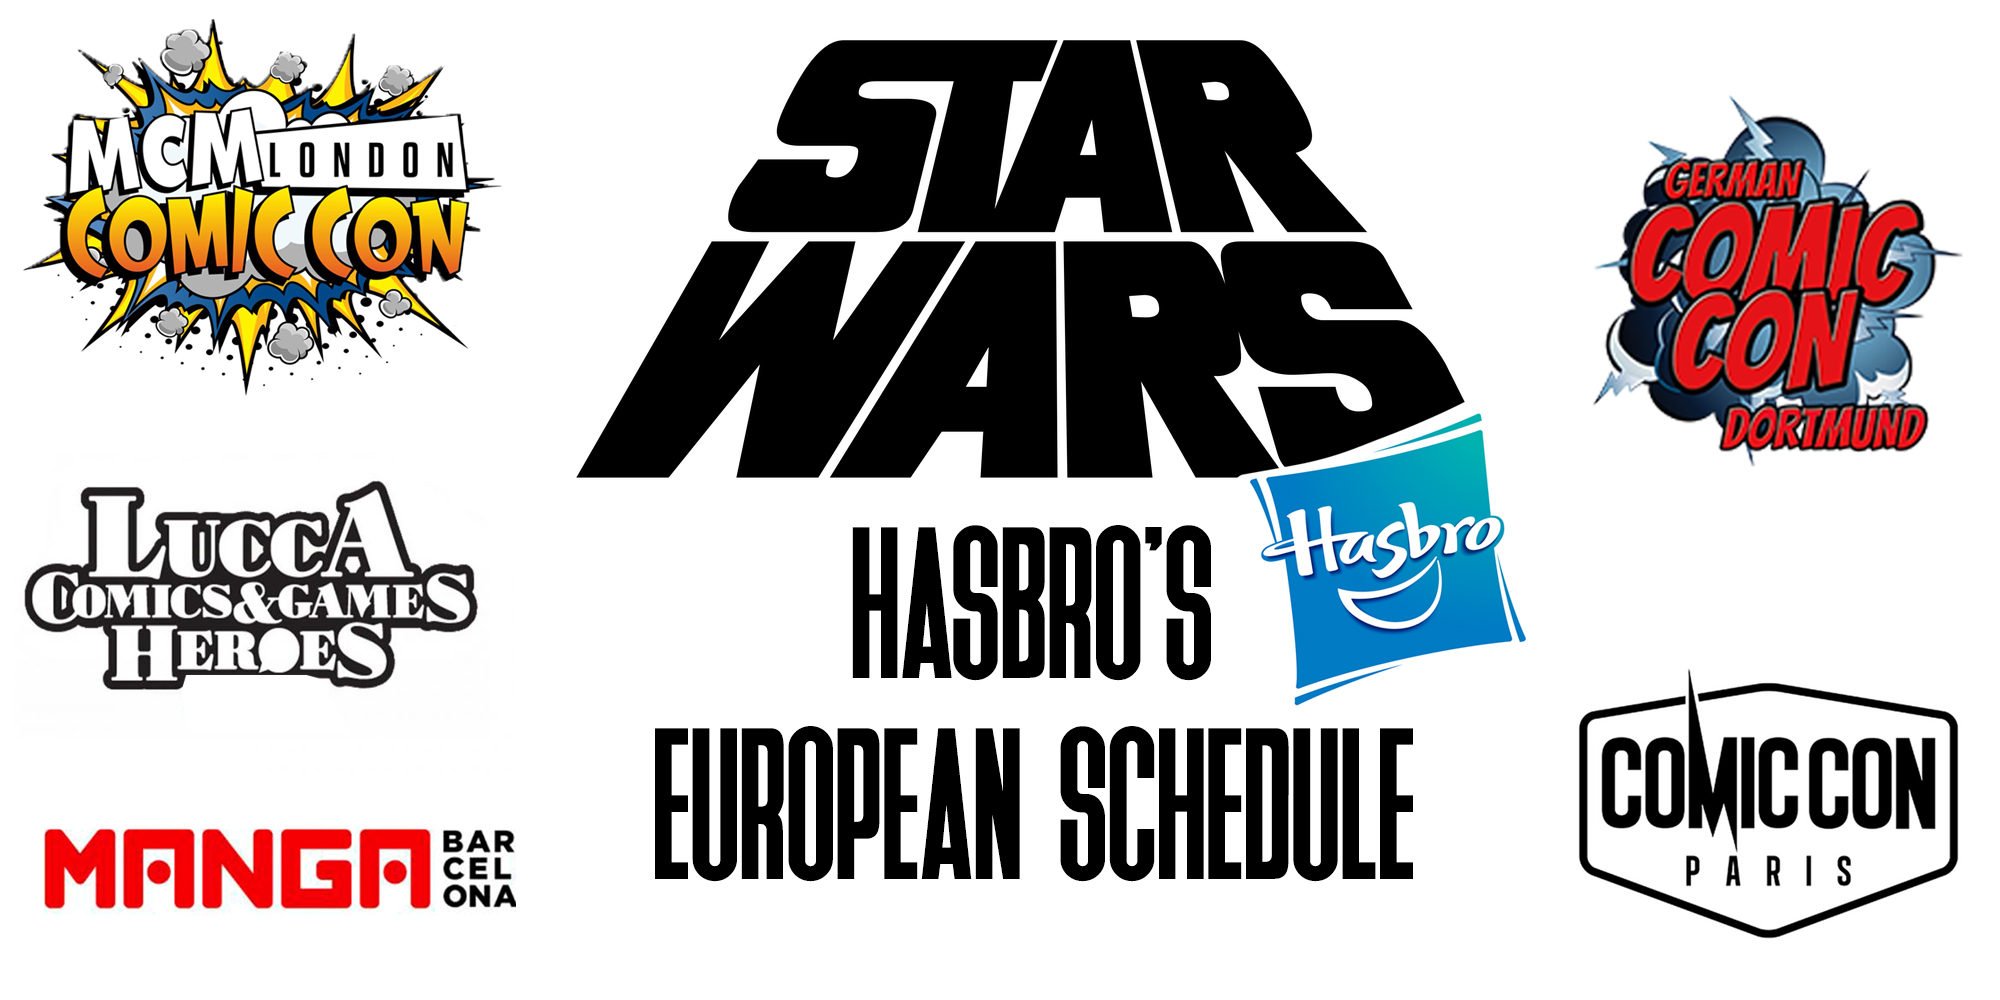 Check Out Hasbro's European Convention Schedule